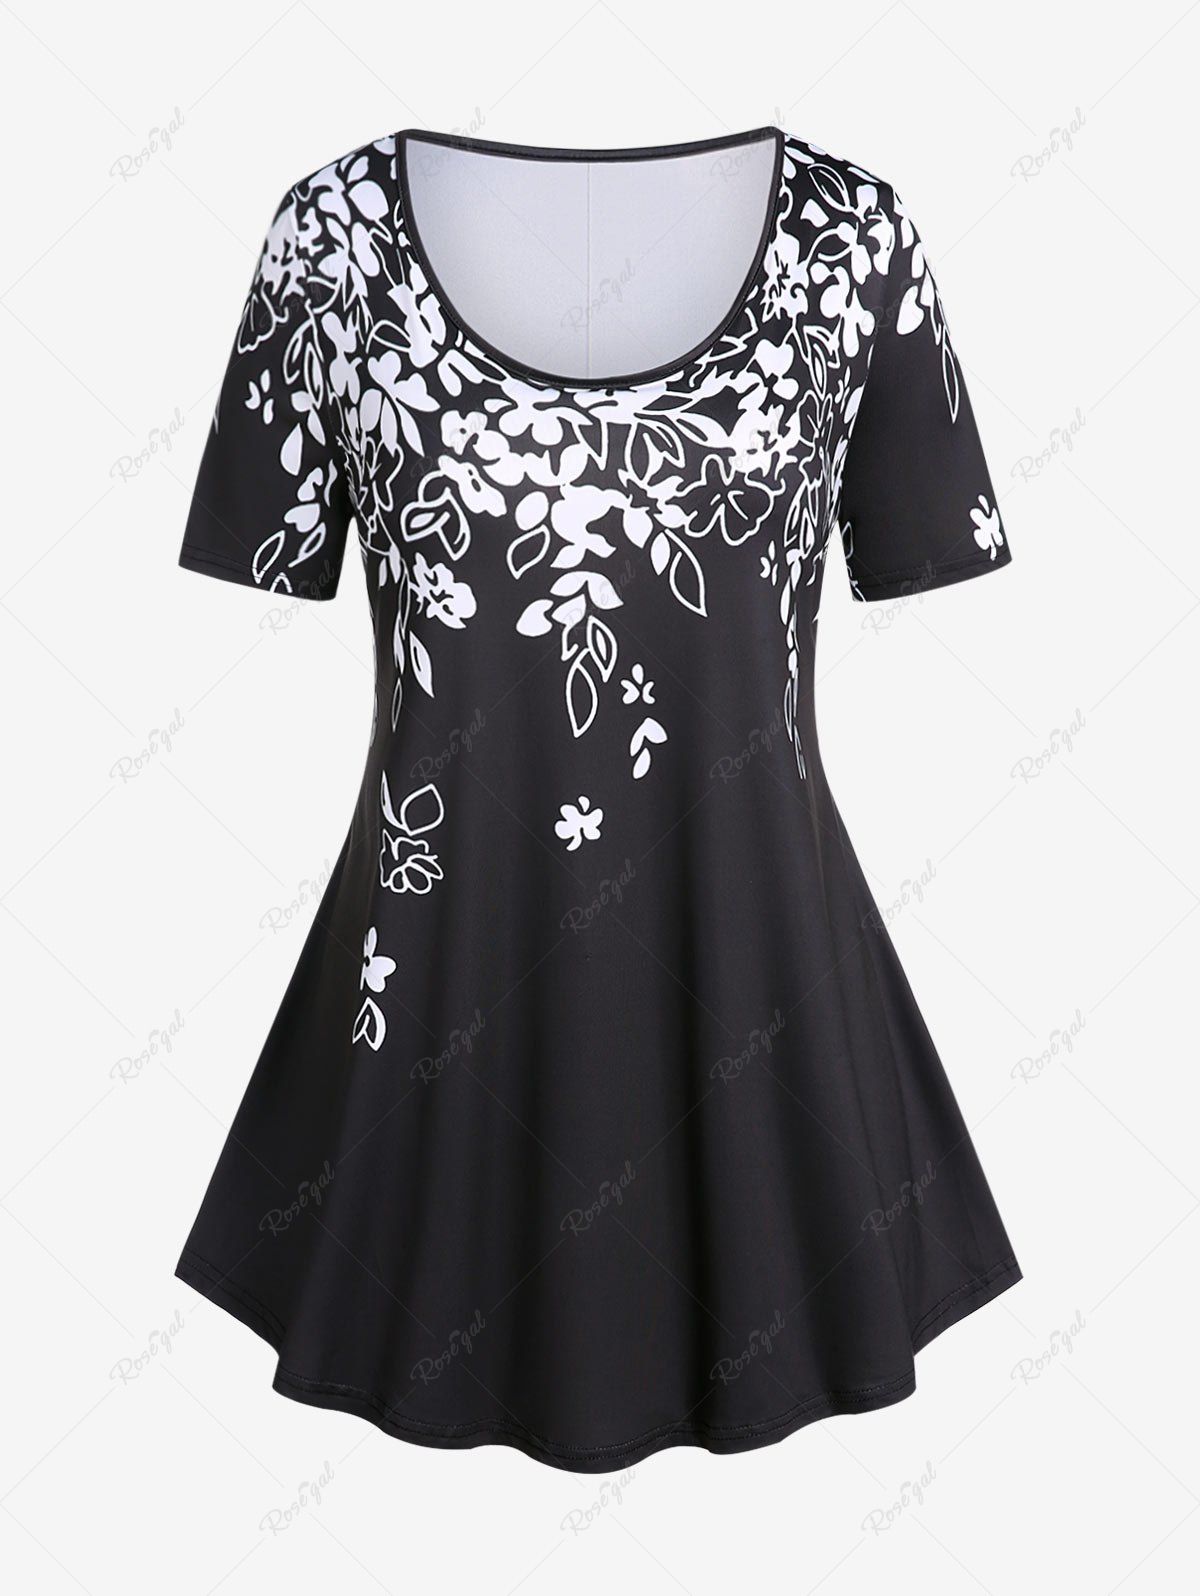 New Plus Size Floral Two Tone Short Sleeves Tee  